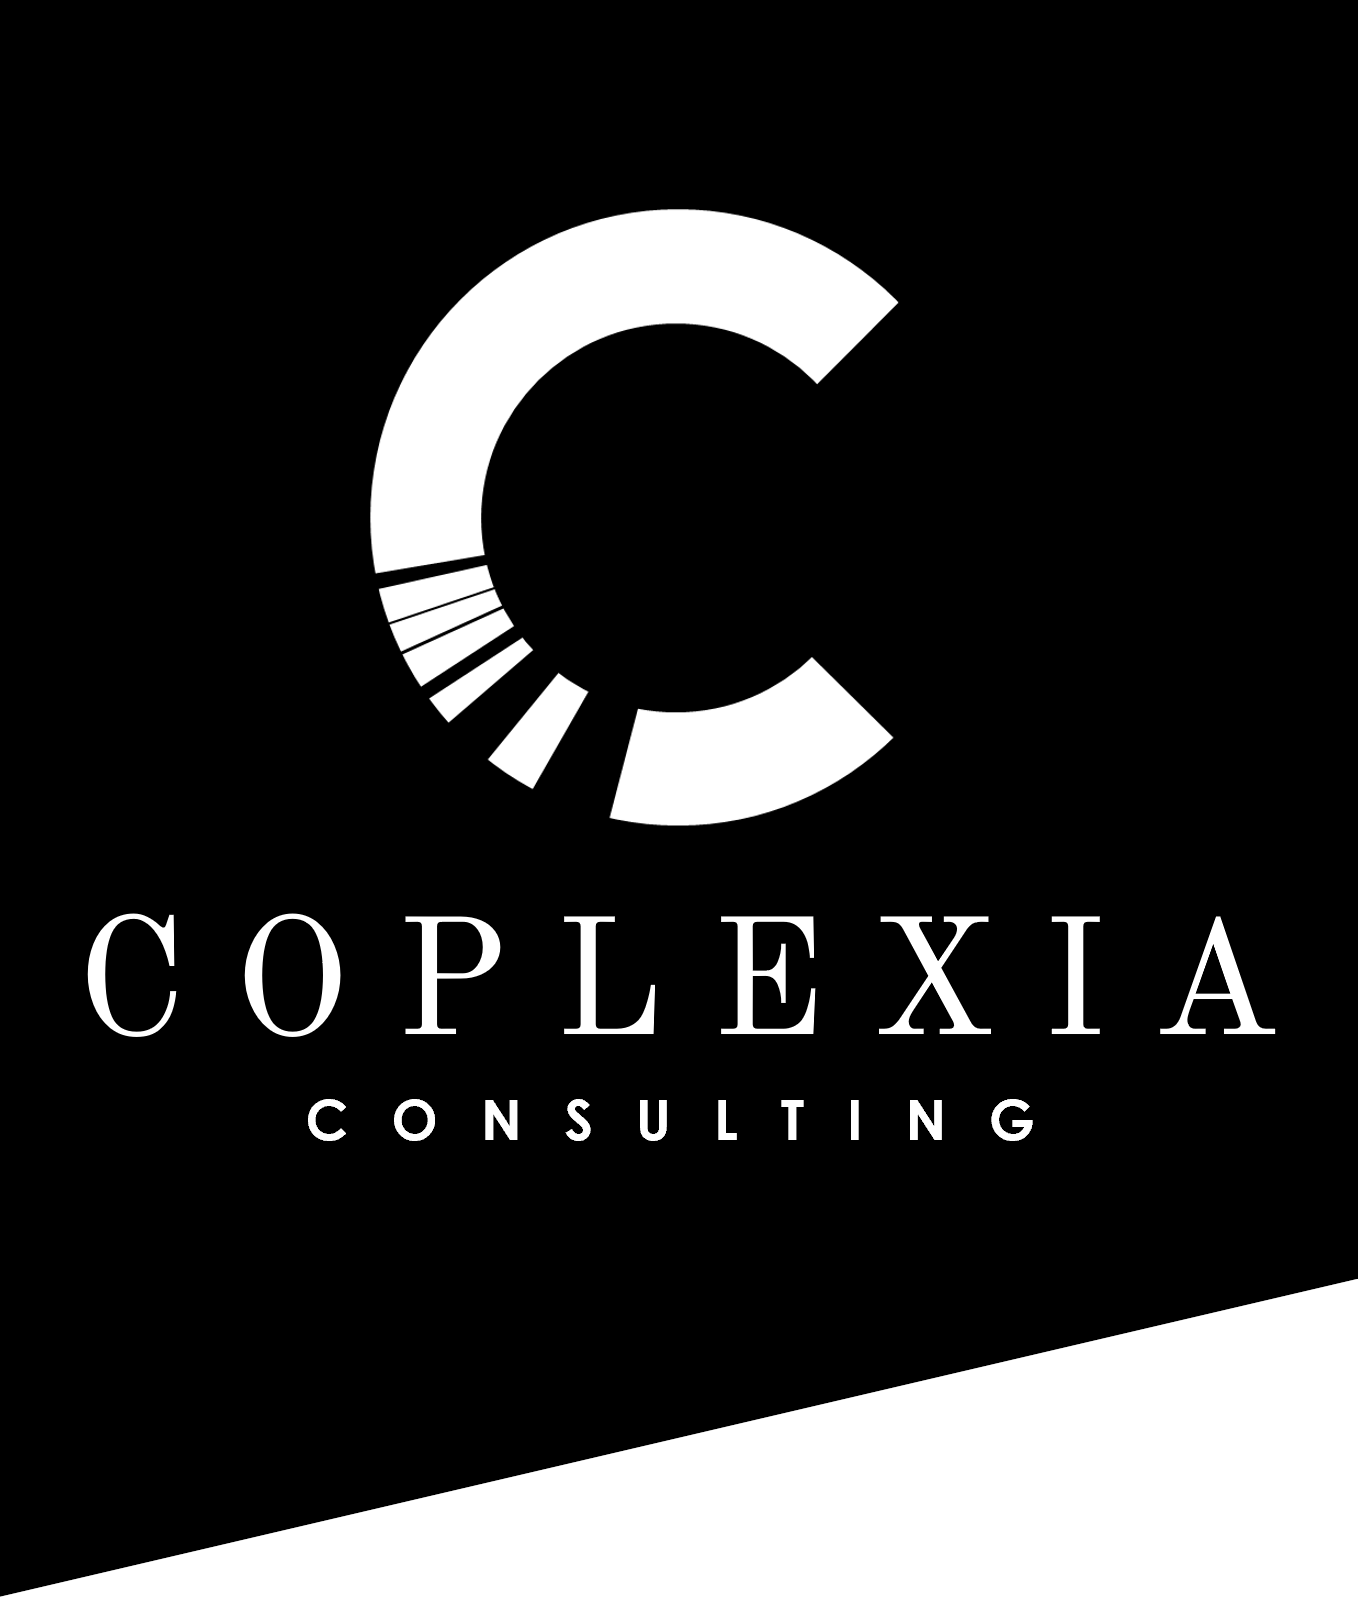 Coplexia Consulting Working Together As Virtuallyone Since 2003 